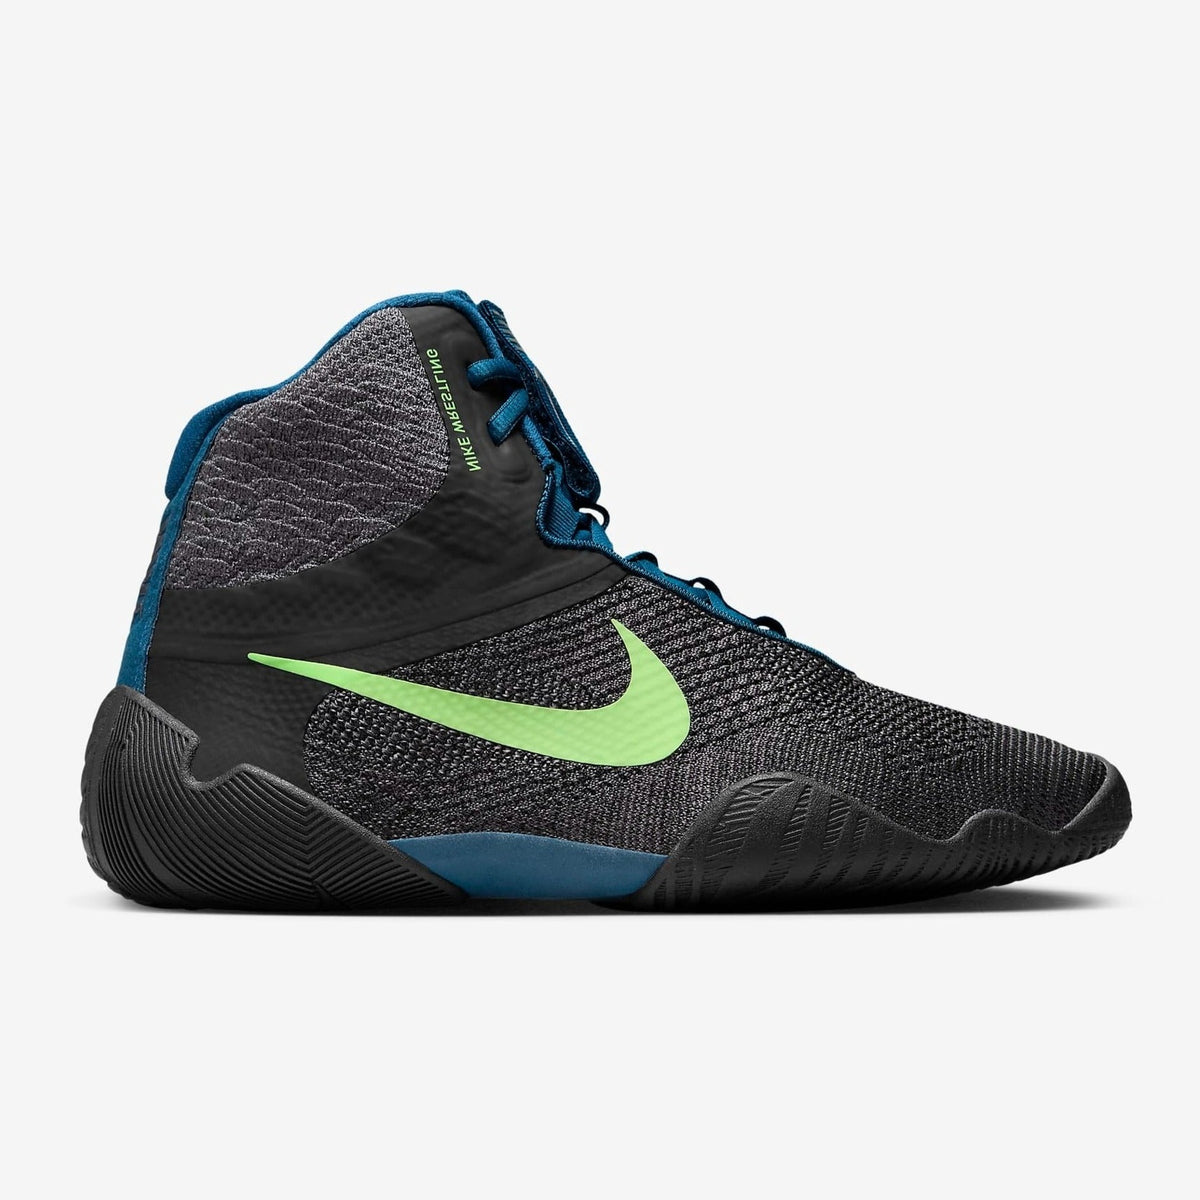 Nike TAWA wrestling shoes. Worn on the mat by world champions and Olympic champions. Great support during training and competition in the usual Nike quality. Wrestling shoes in the color blue/black